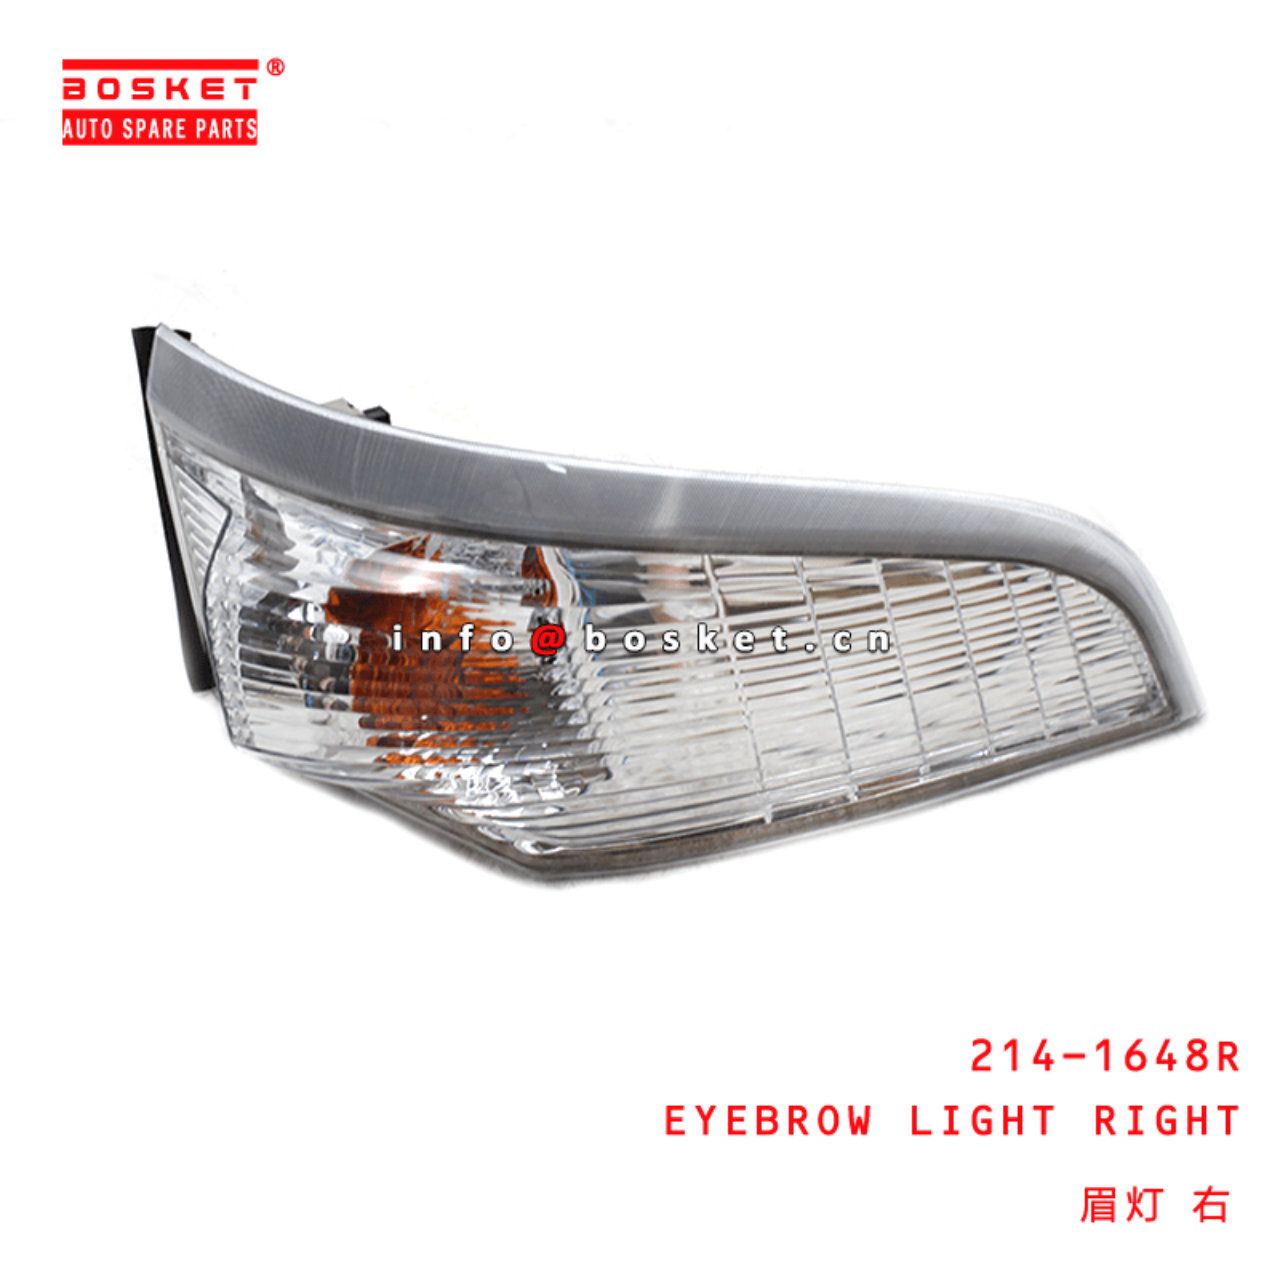 214-1648R Eyebrow Light Right Suitable For MITSUBISHI FUSO 